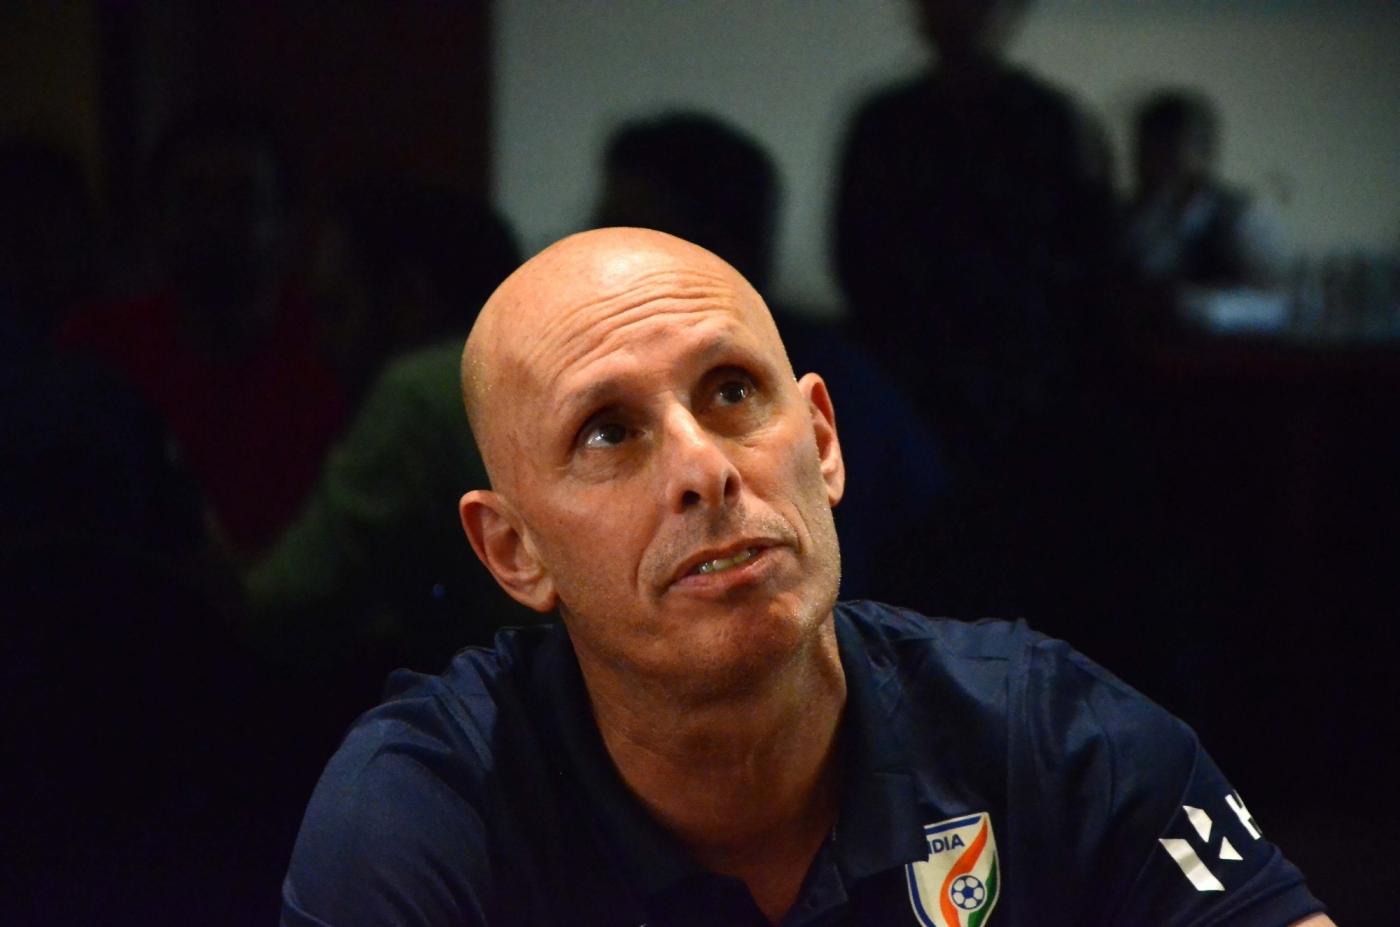 Mumbai: Indian football team coach Stephen Constantine during a press conference in Mumbai on May 19, 2018. (Photo: IANS) by .